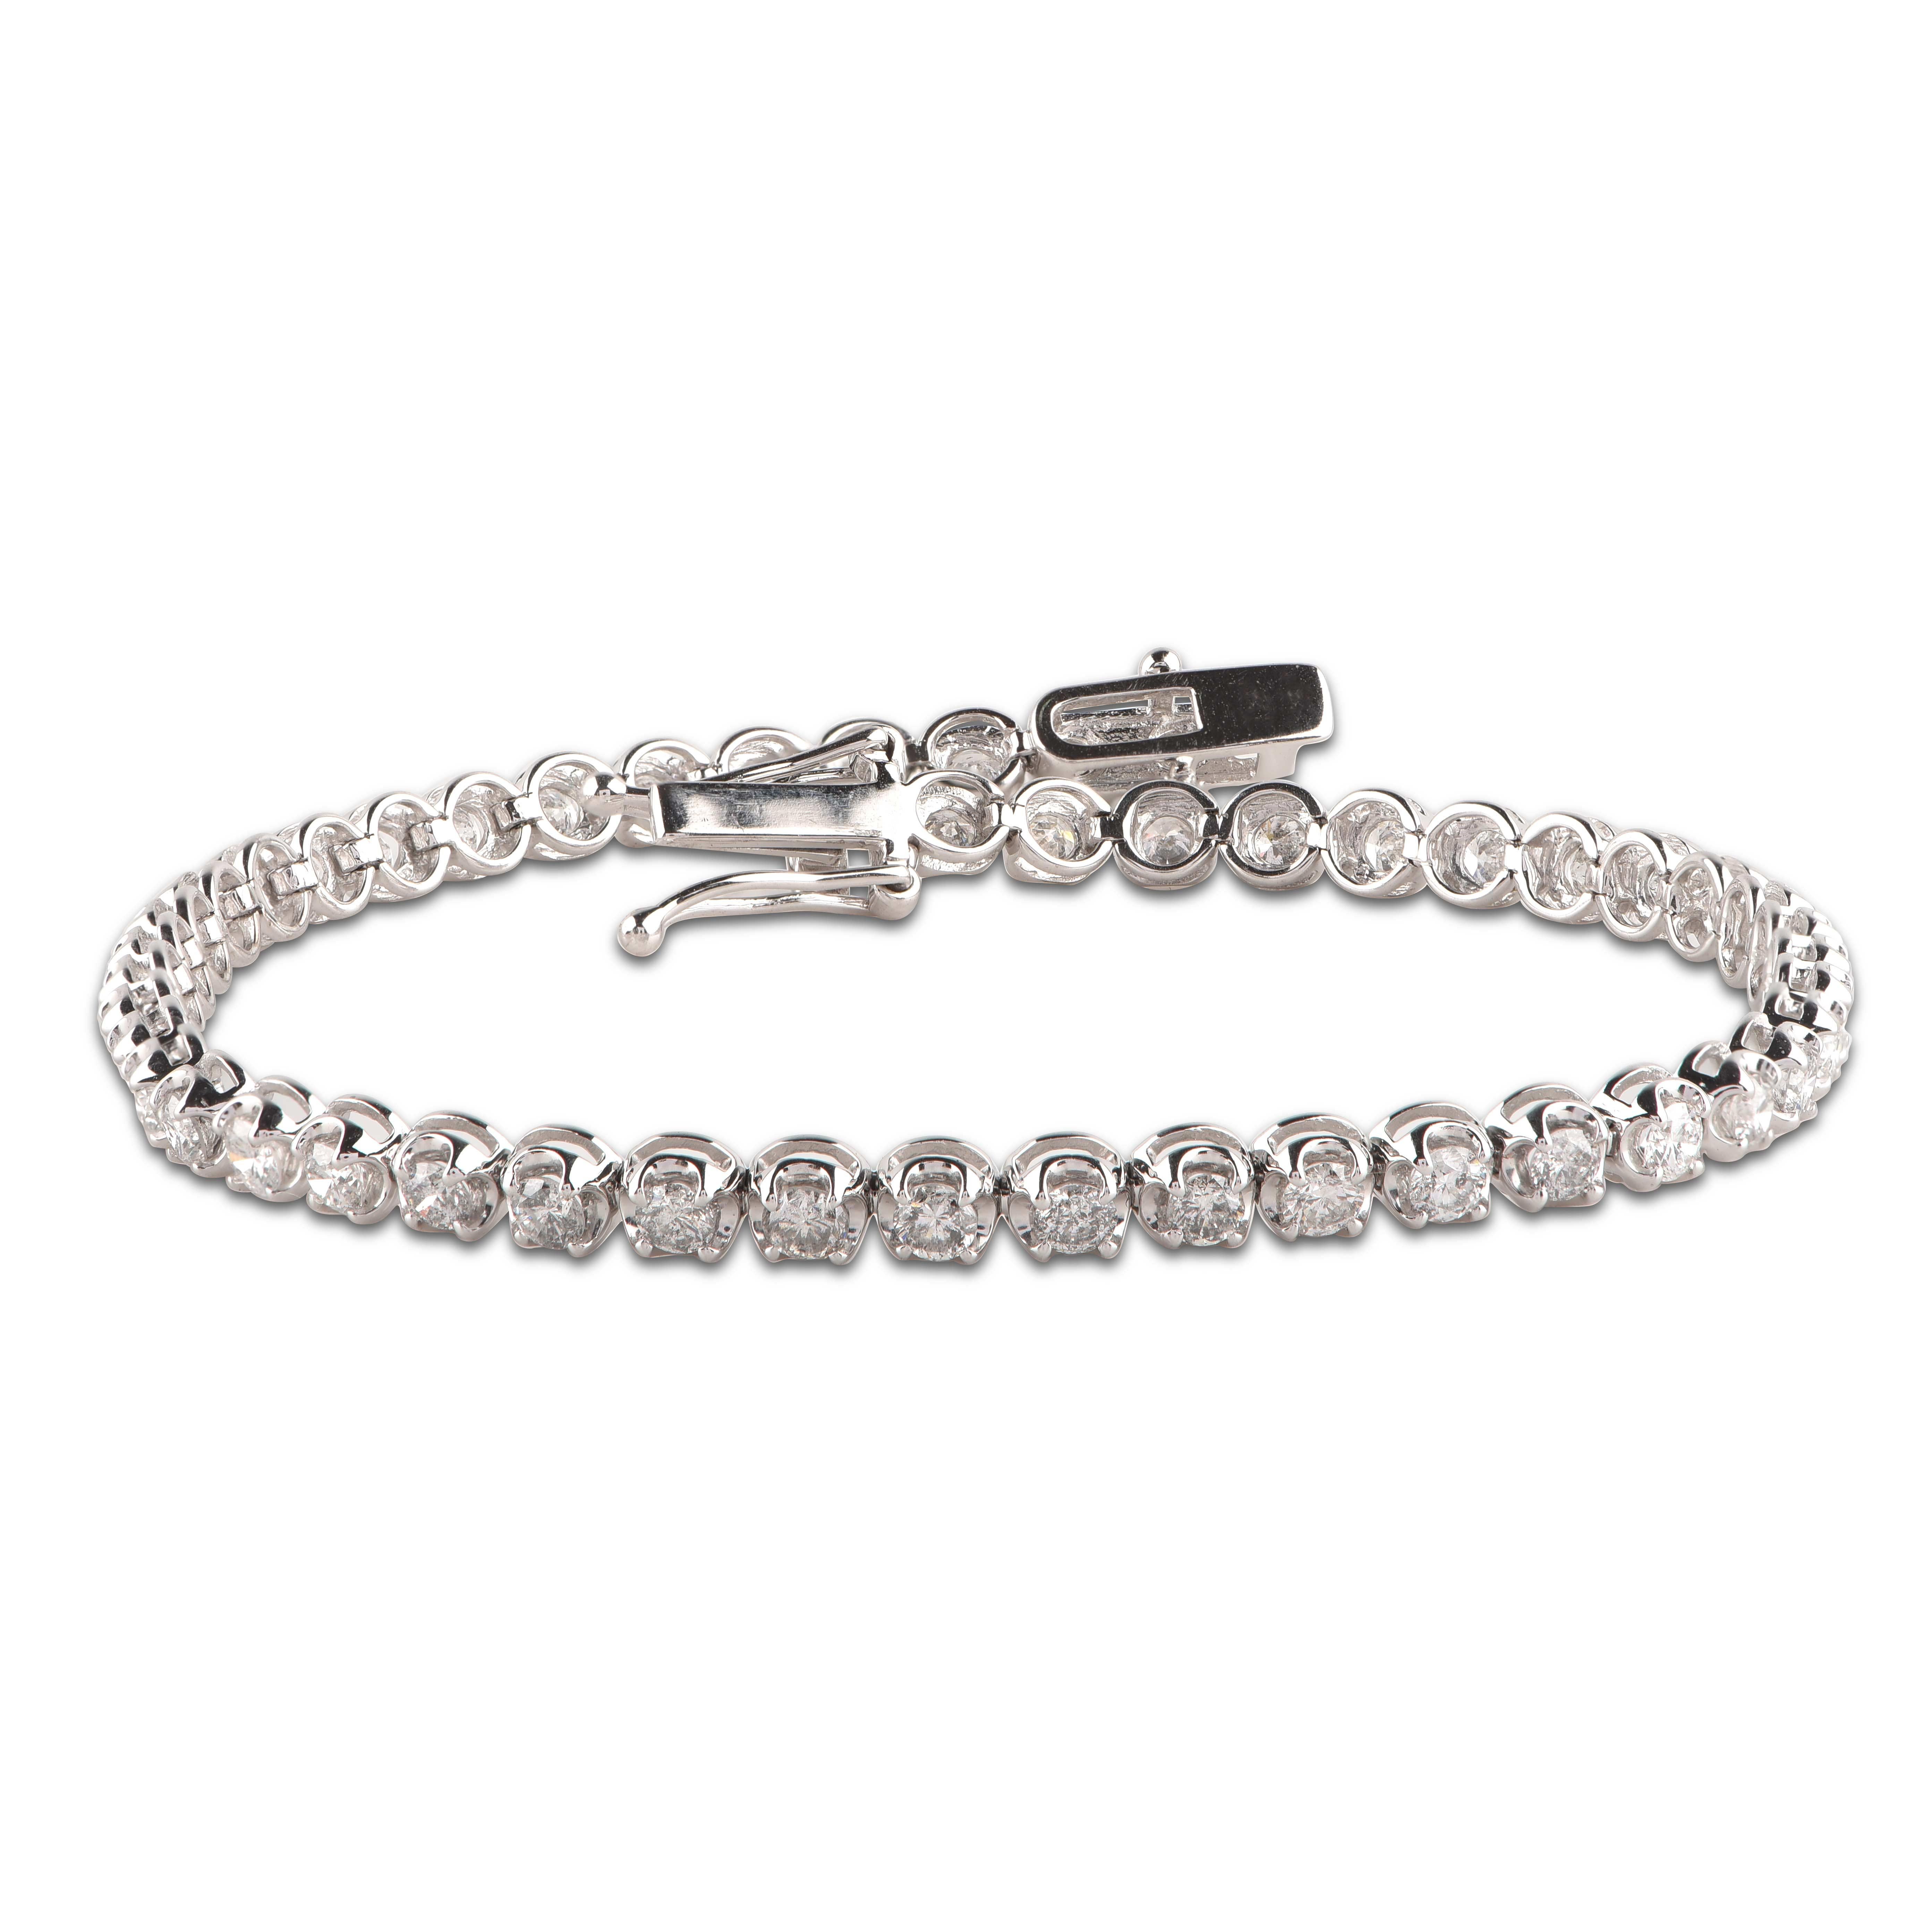 This bracelet dazzles with 48 brilliant cut diamonds set beautifully in prong setting and crafted by our skillful craftsmen in 14-karat white gold. The diamonds are graded H-I Color, I3 Clarity.  

This piece is made to order, please allow 2-3 weeks